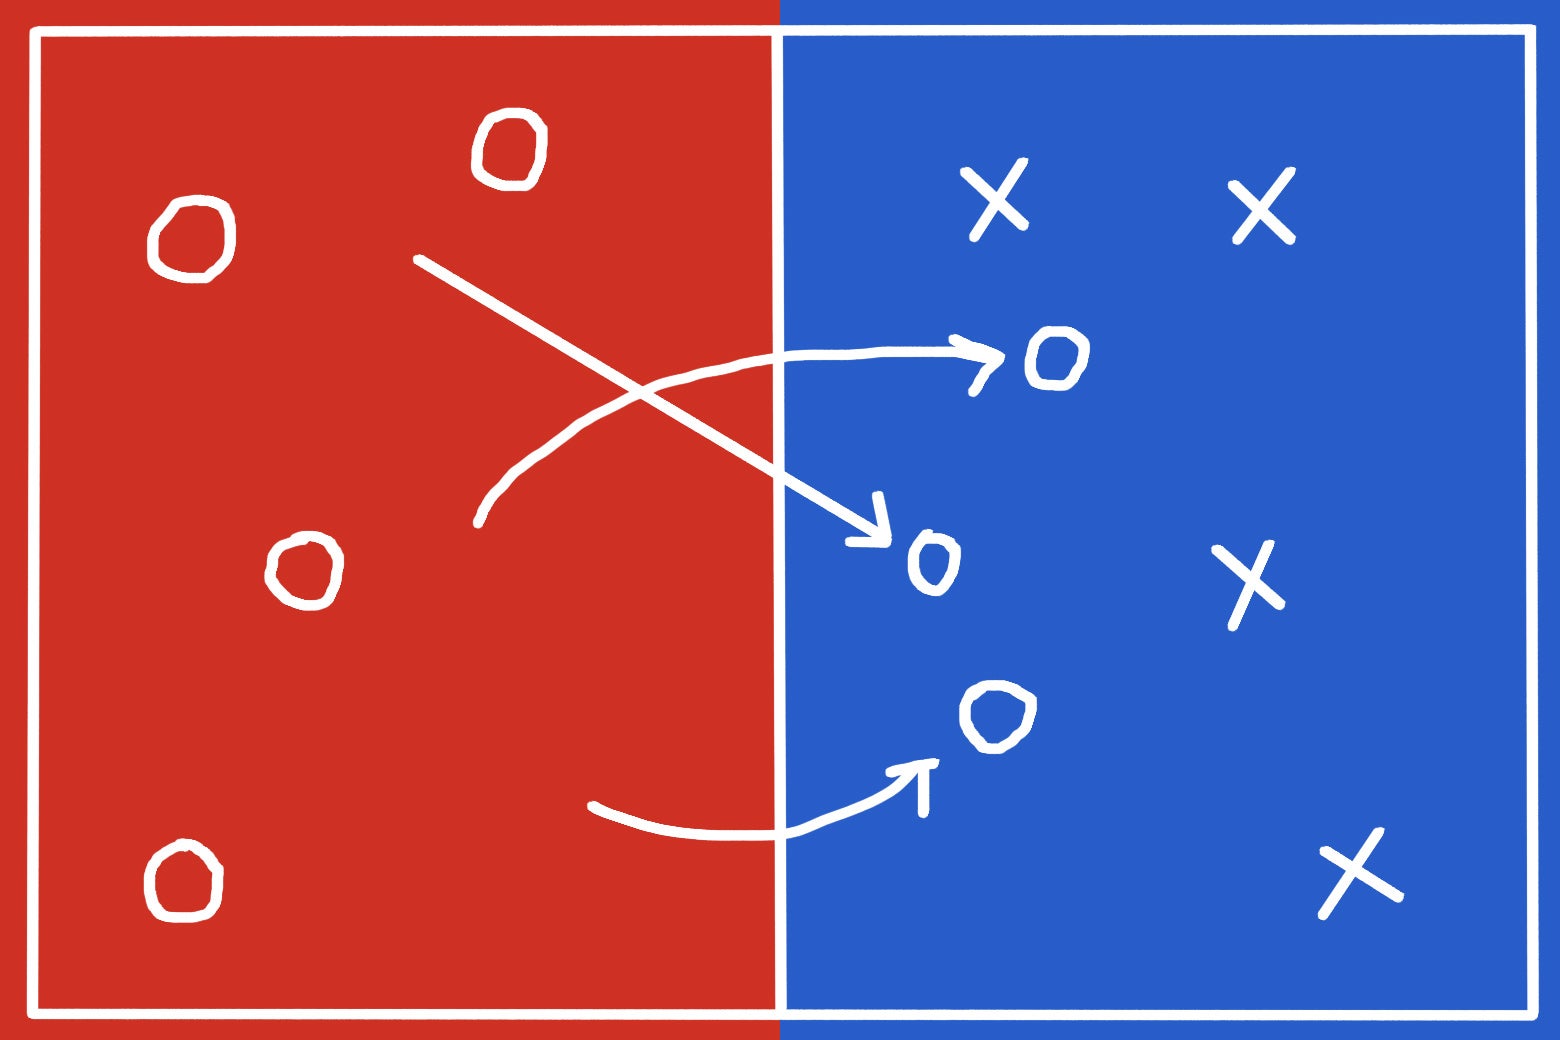 Circles in a red area going over to join X's in a blue area.